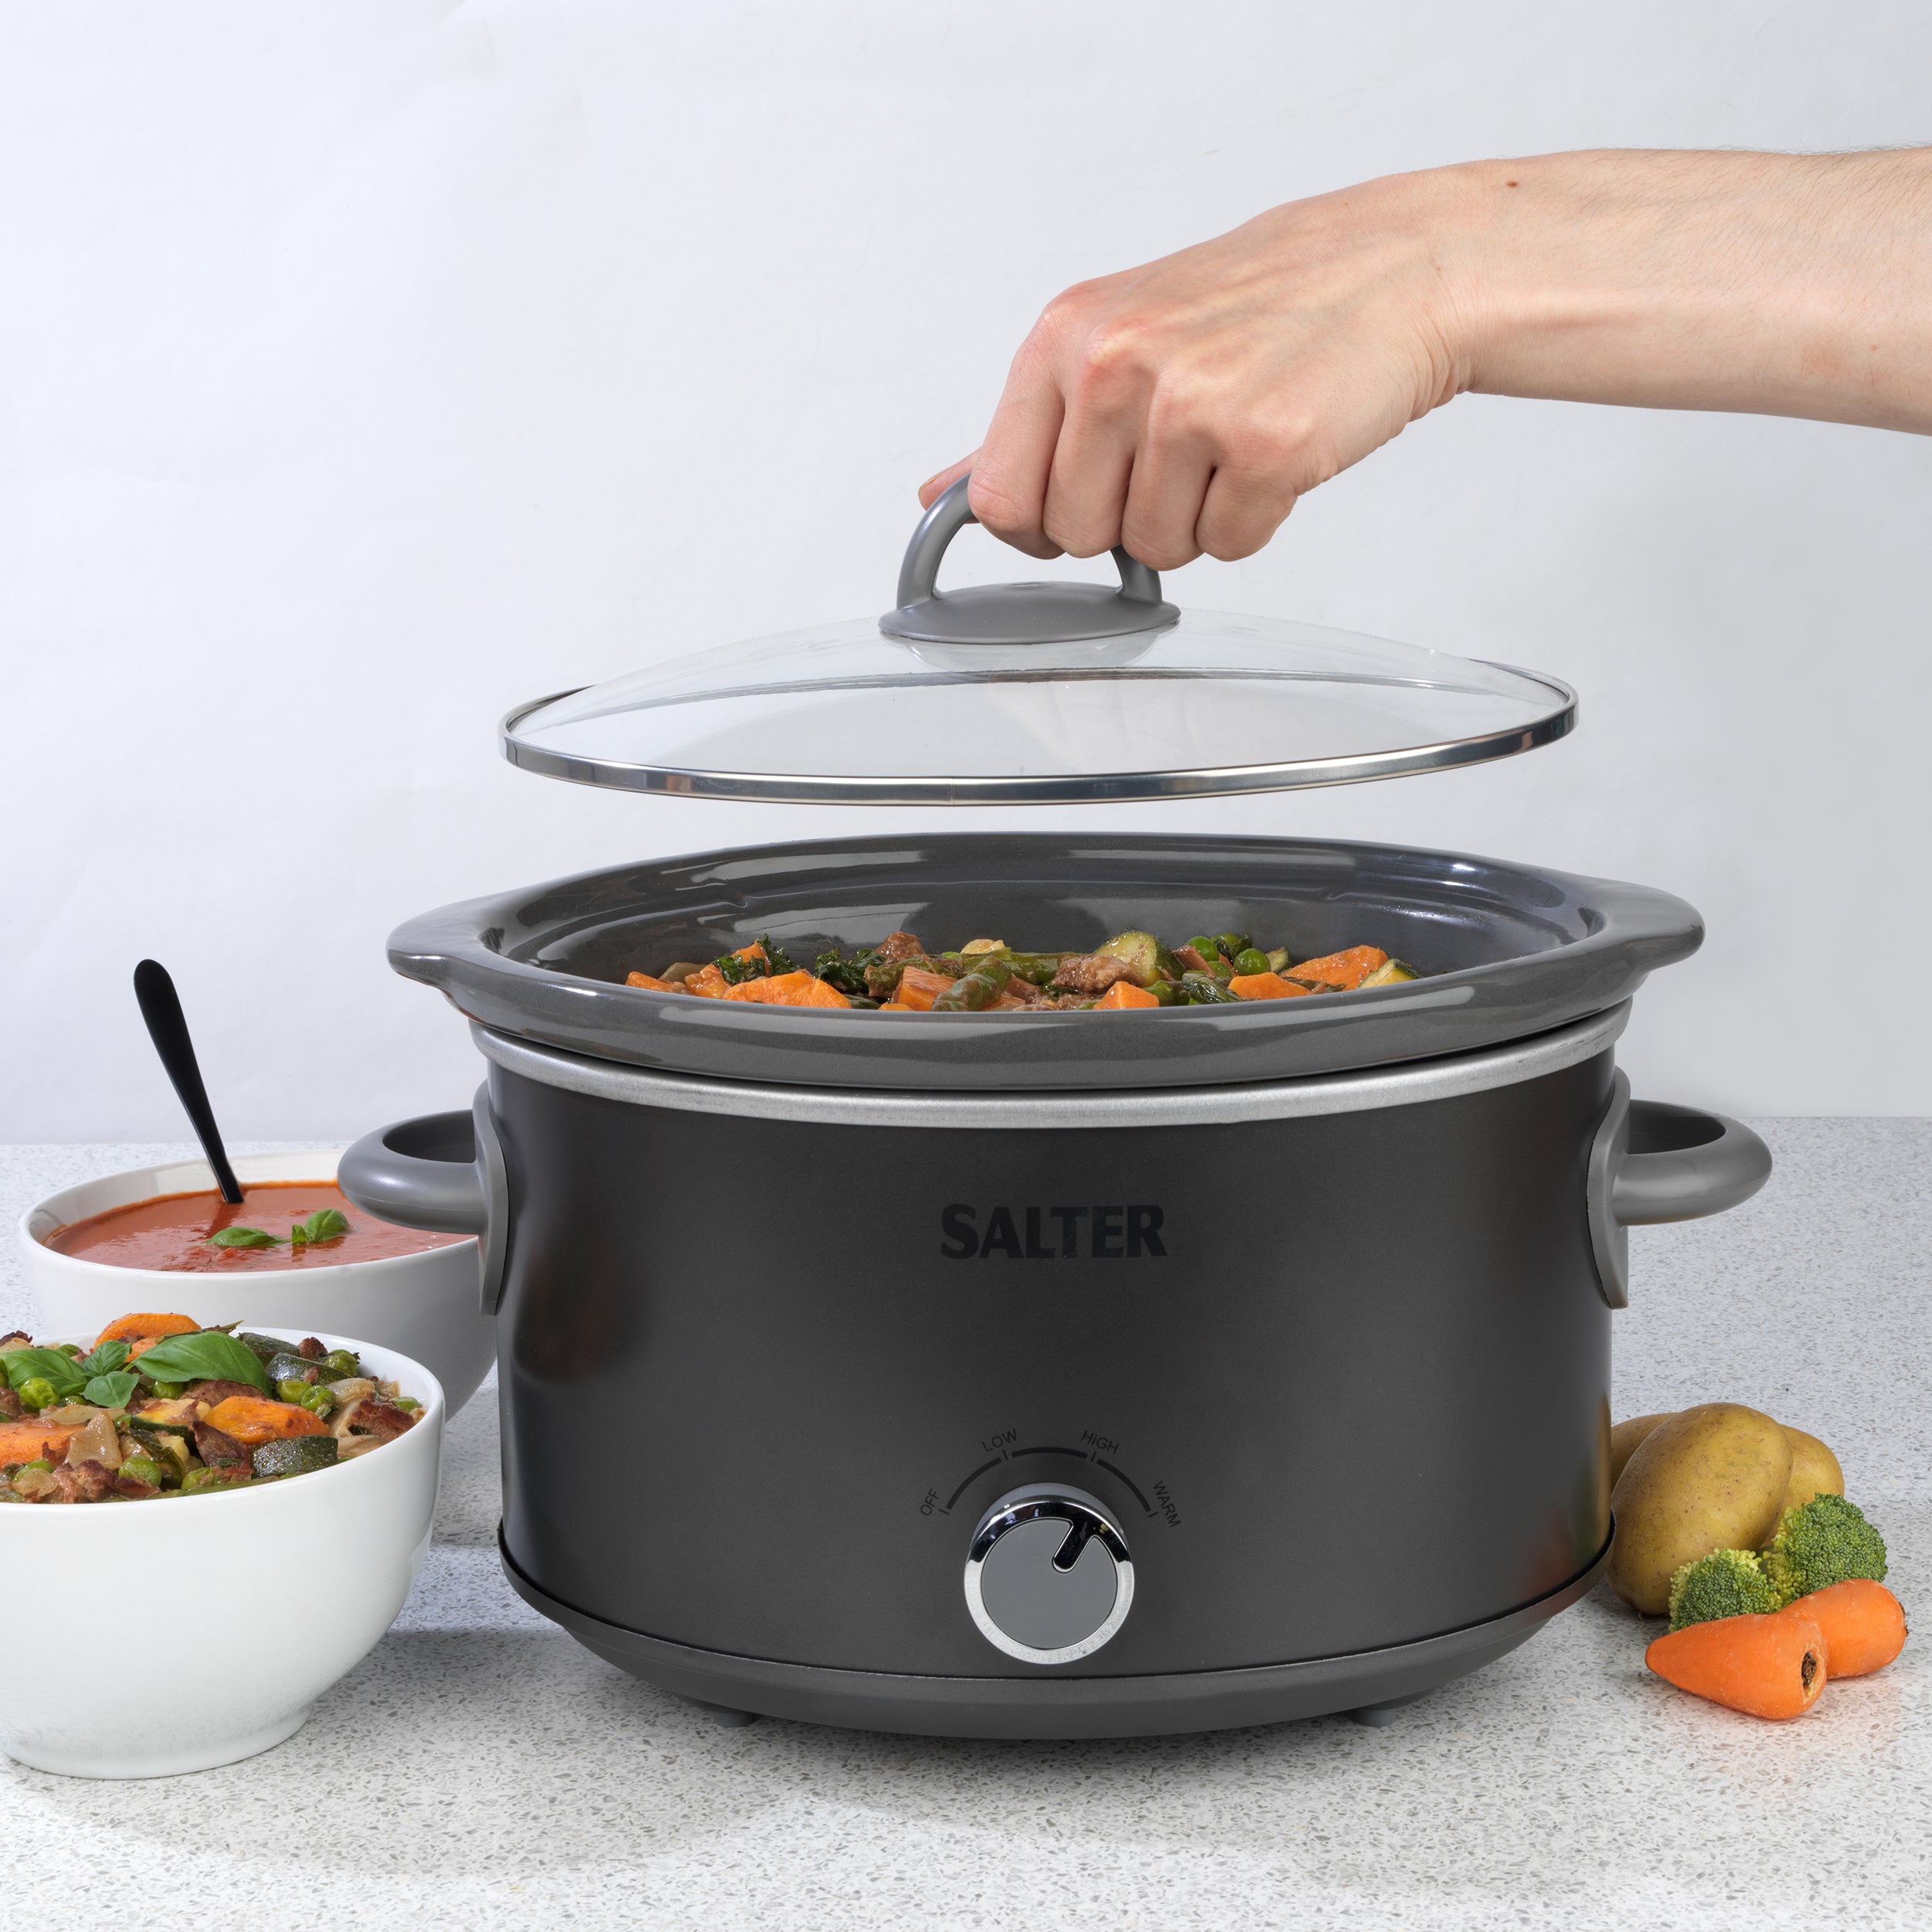 Salter Cosmos 35l Oval Slow Cooker Grey